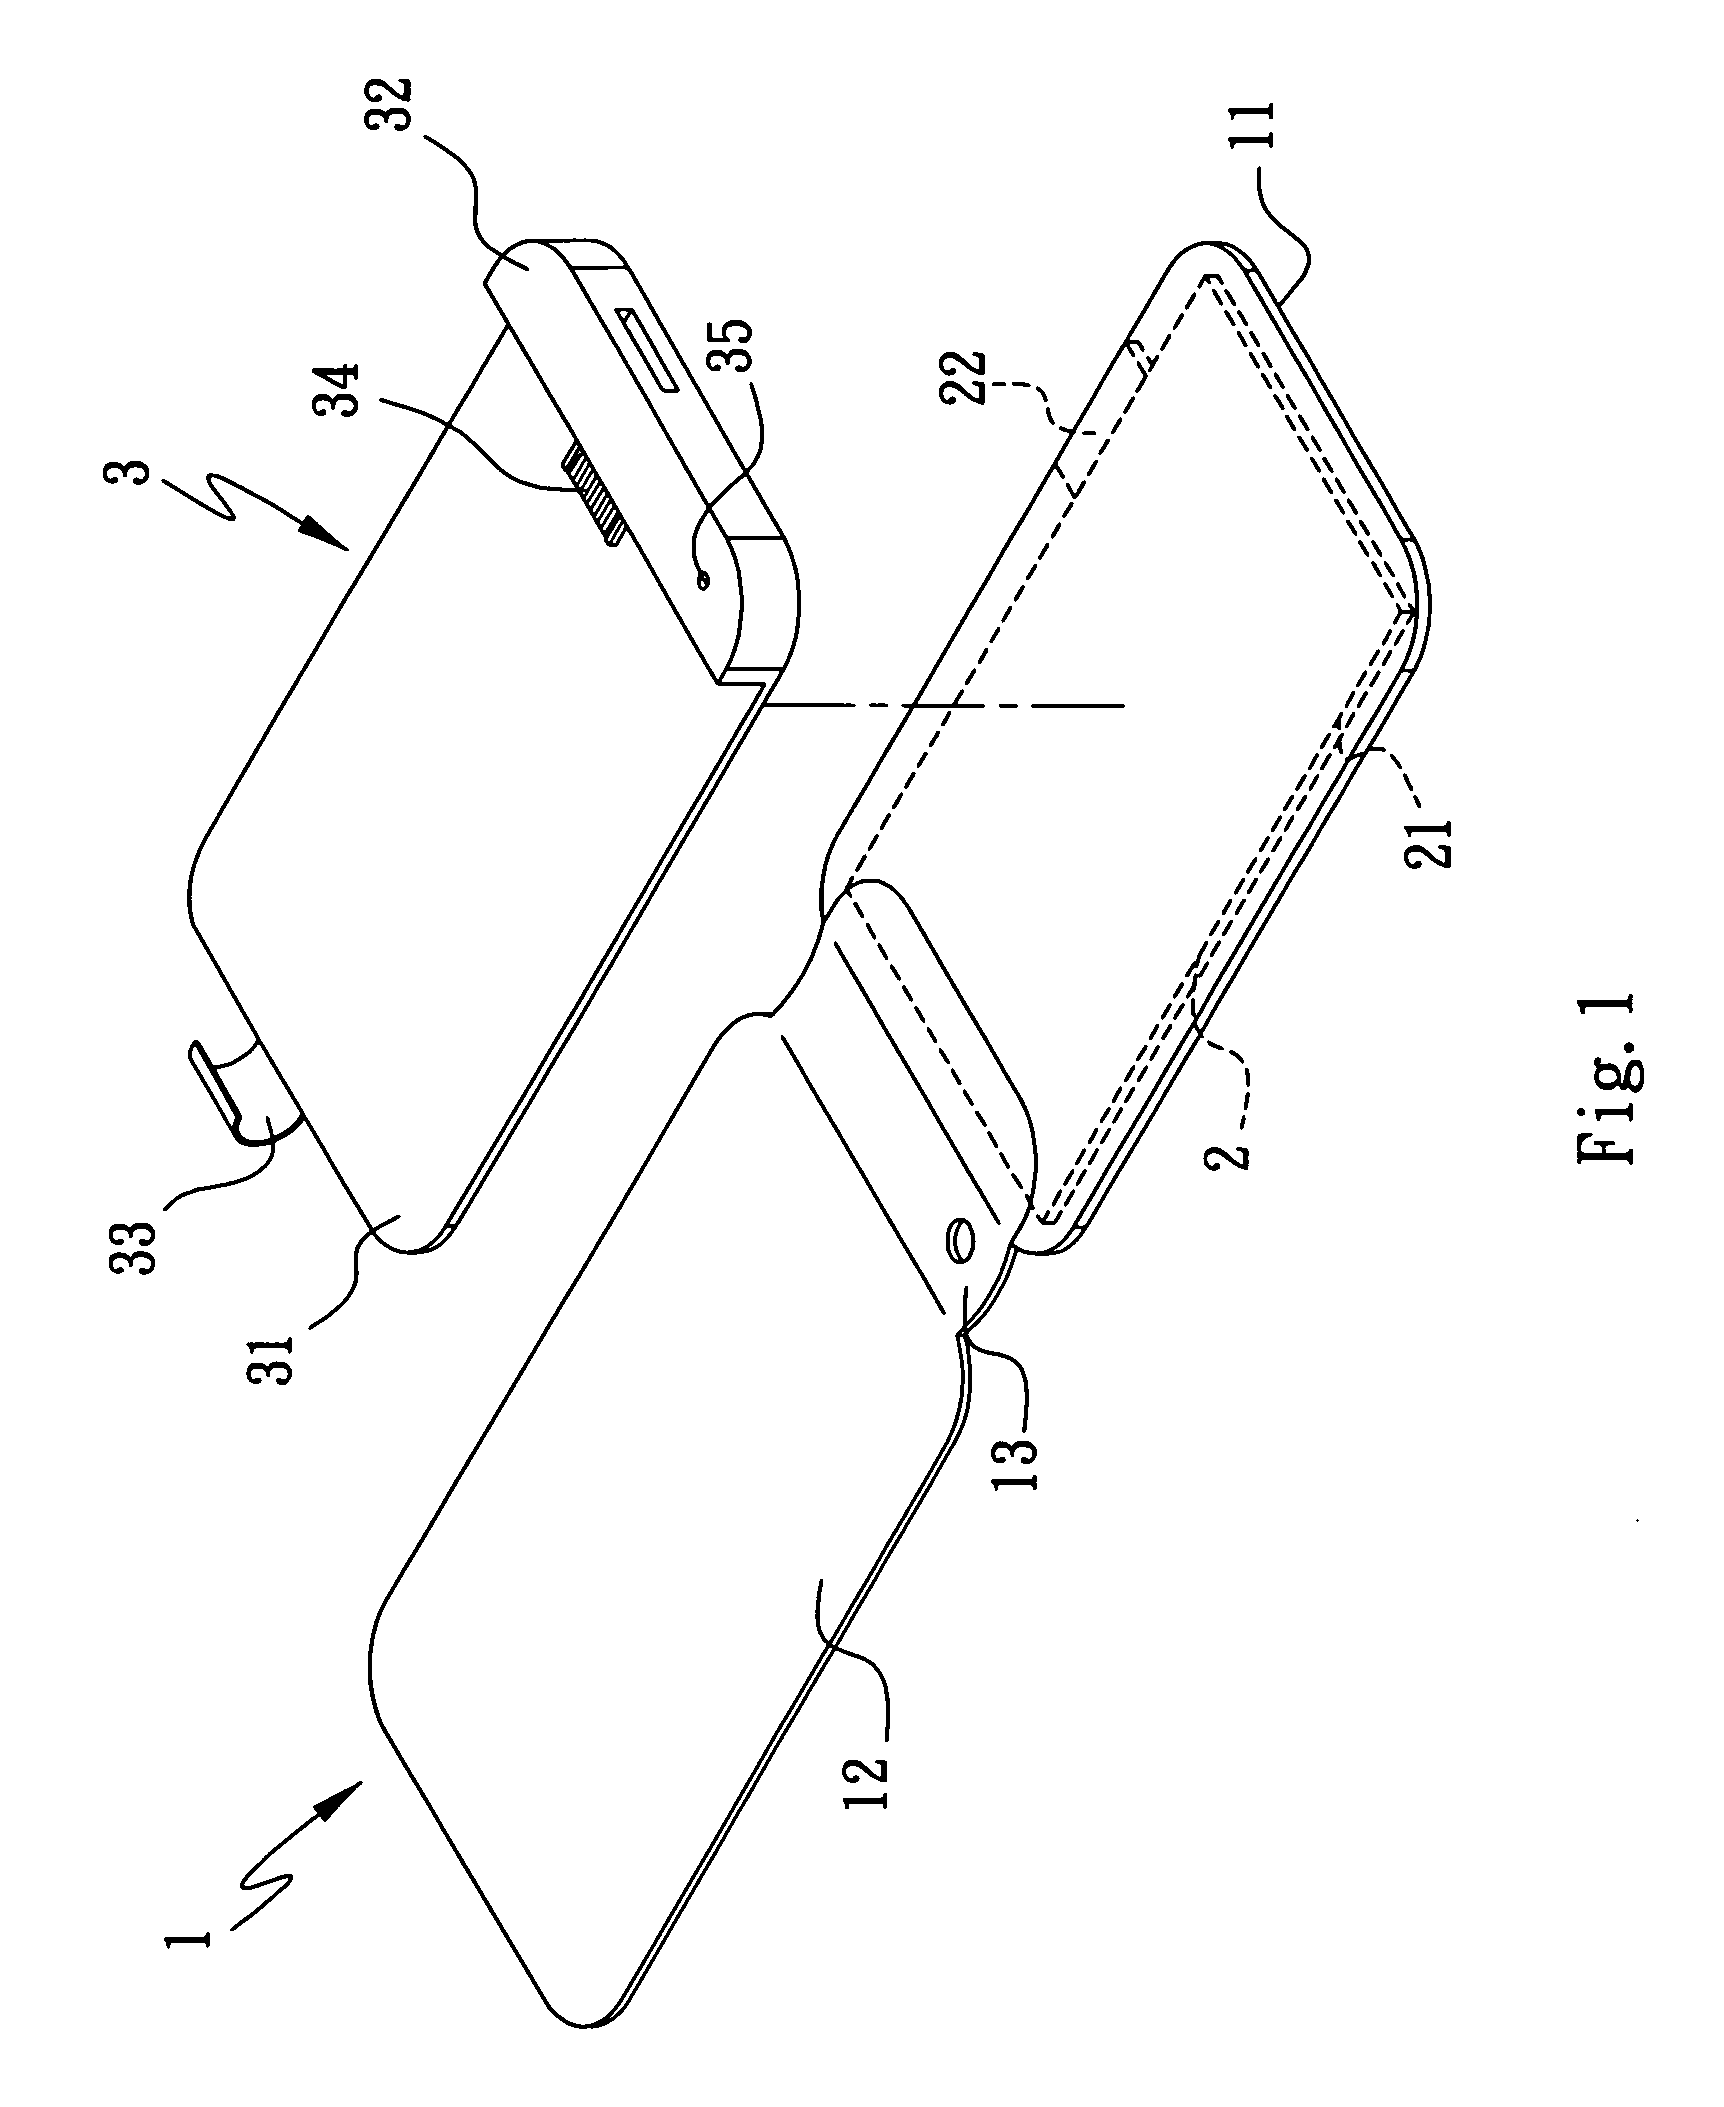 Protective Cover With Power Supply Unit For Portable Electronic Device